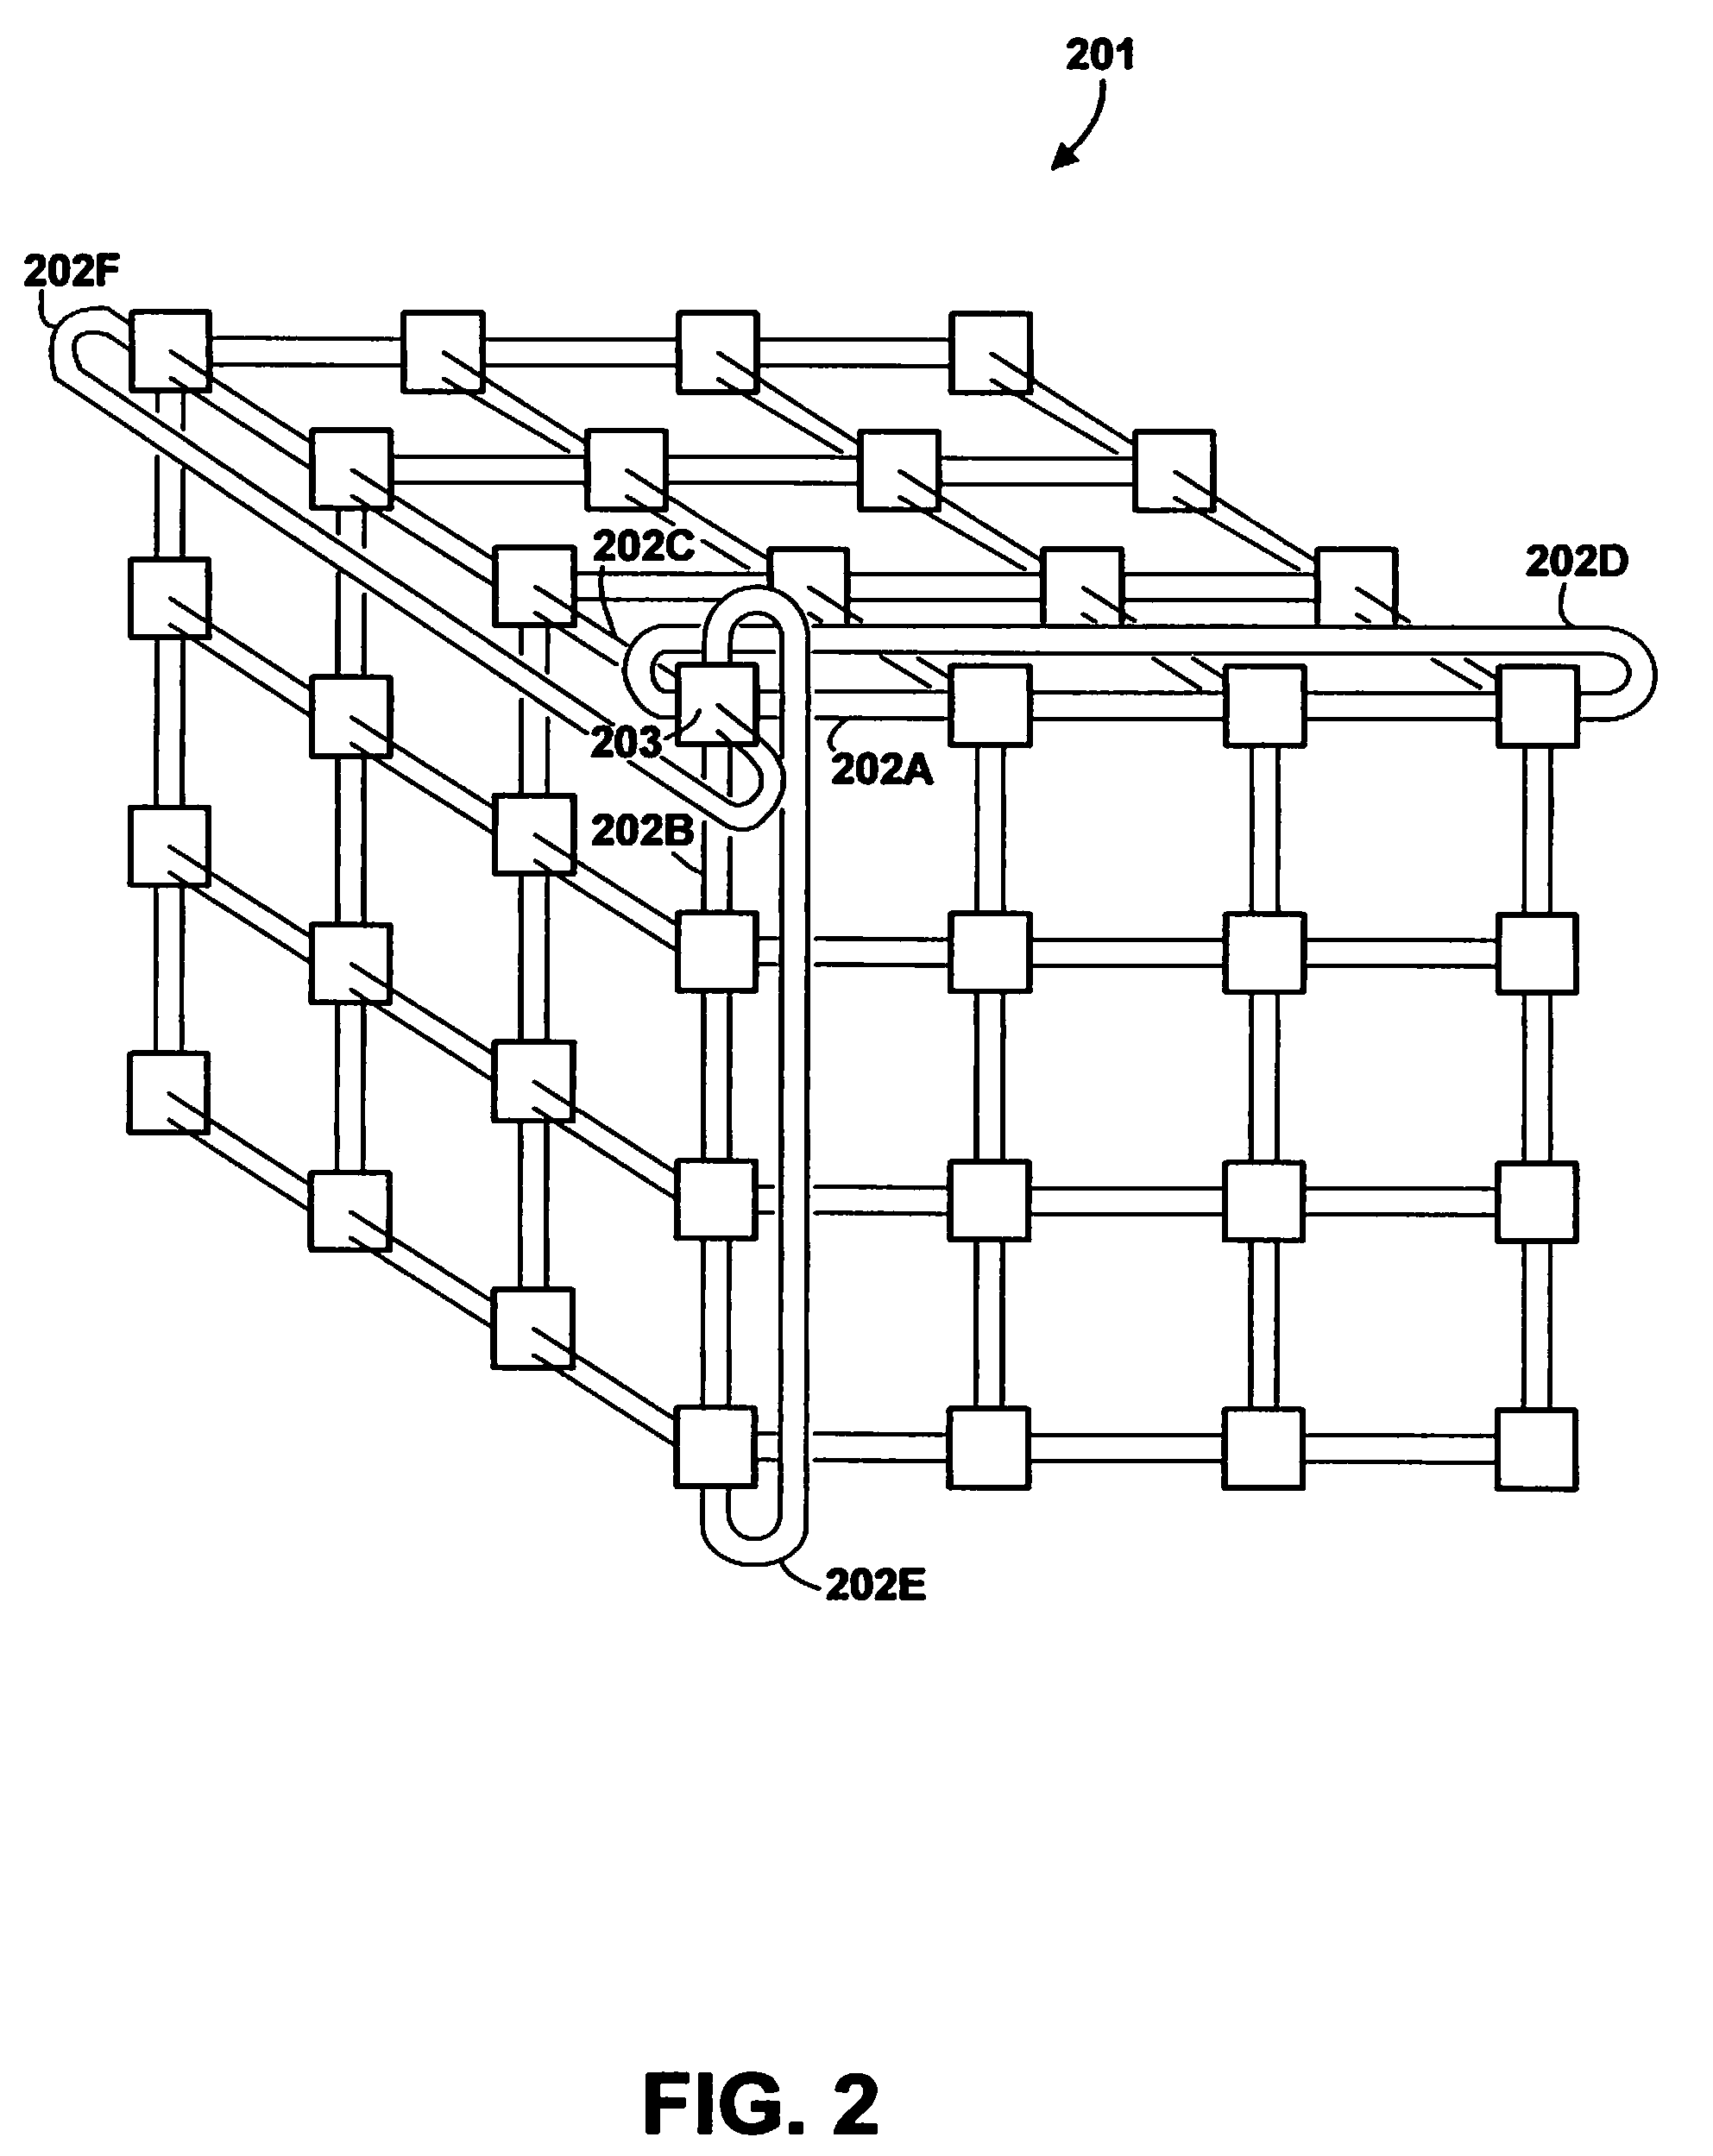 Method and apparatus for obtaining stack traceback data for multiple computing nodes of a massively parallel computer system